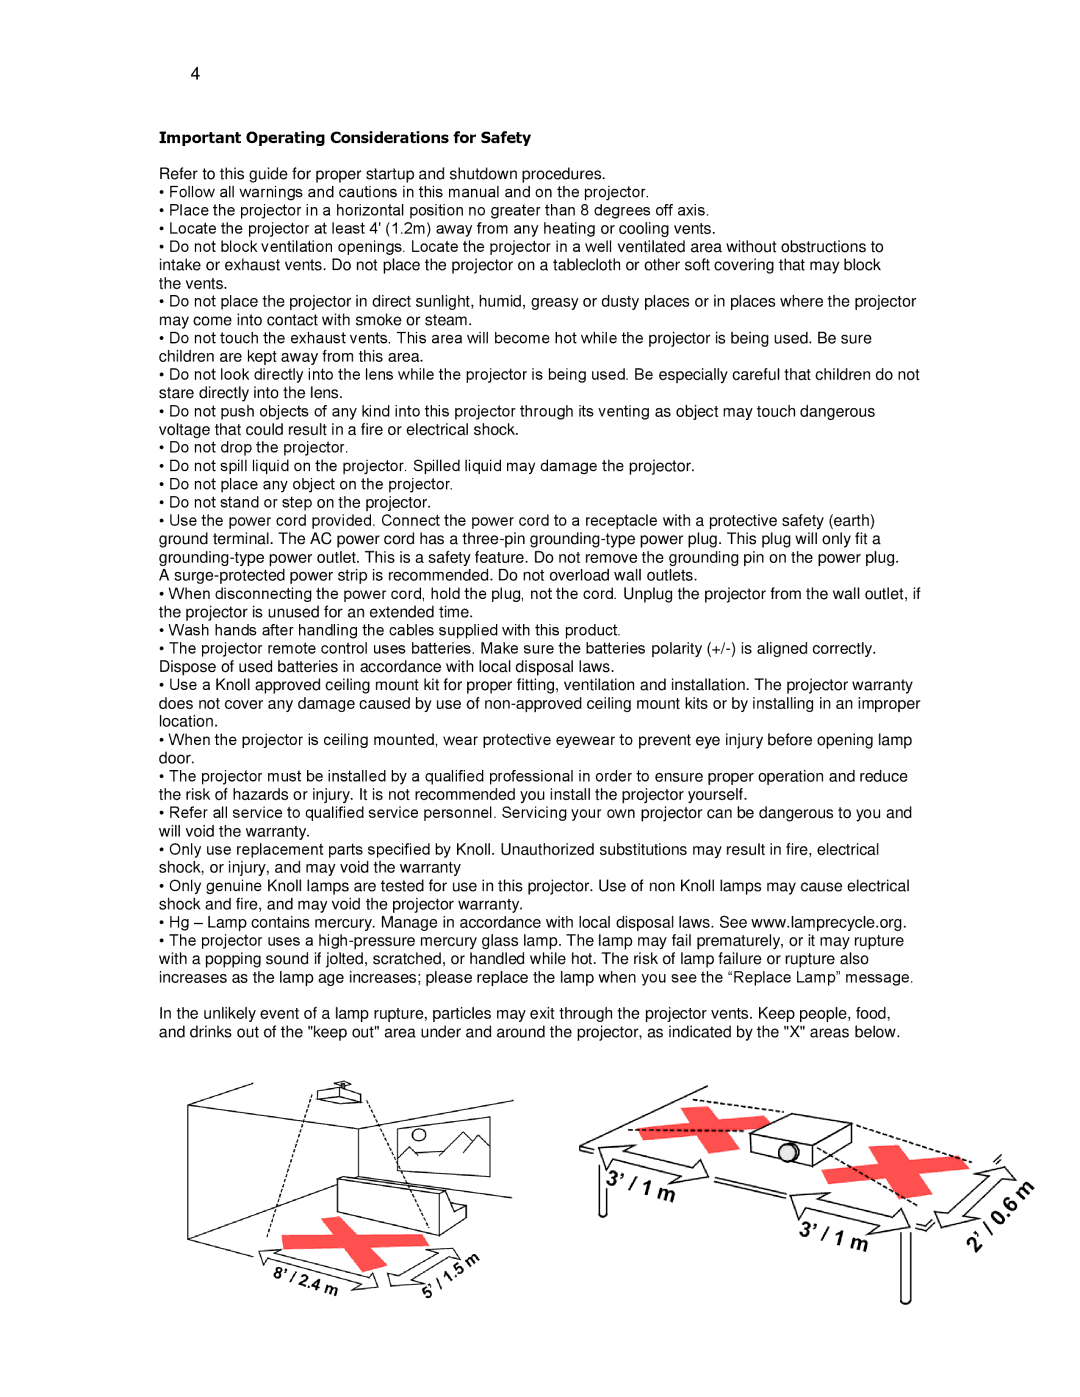 Knoll Systems HDP6000 user manual Important Operating Considerations for Safety 